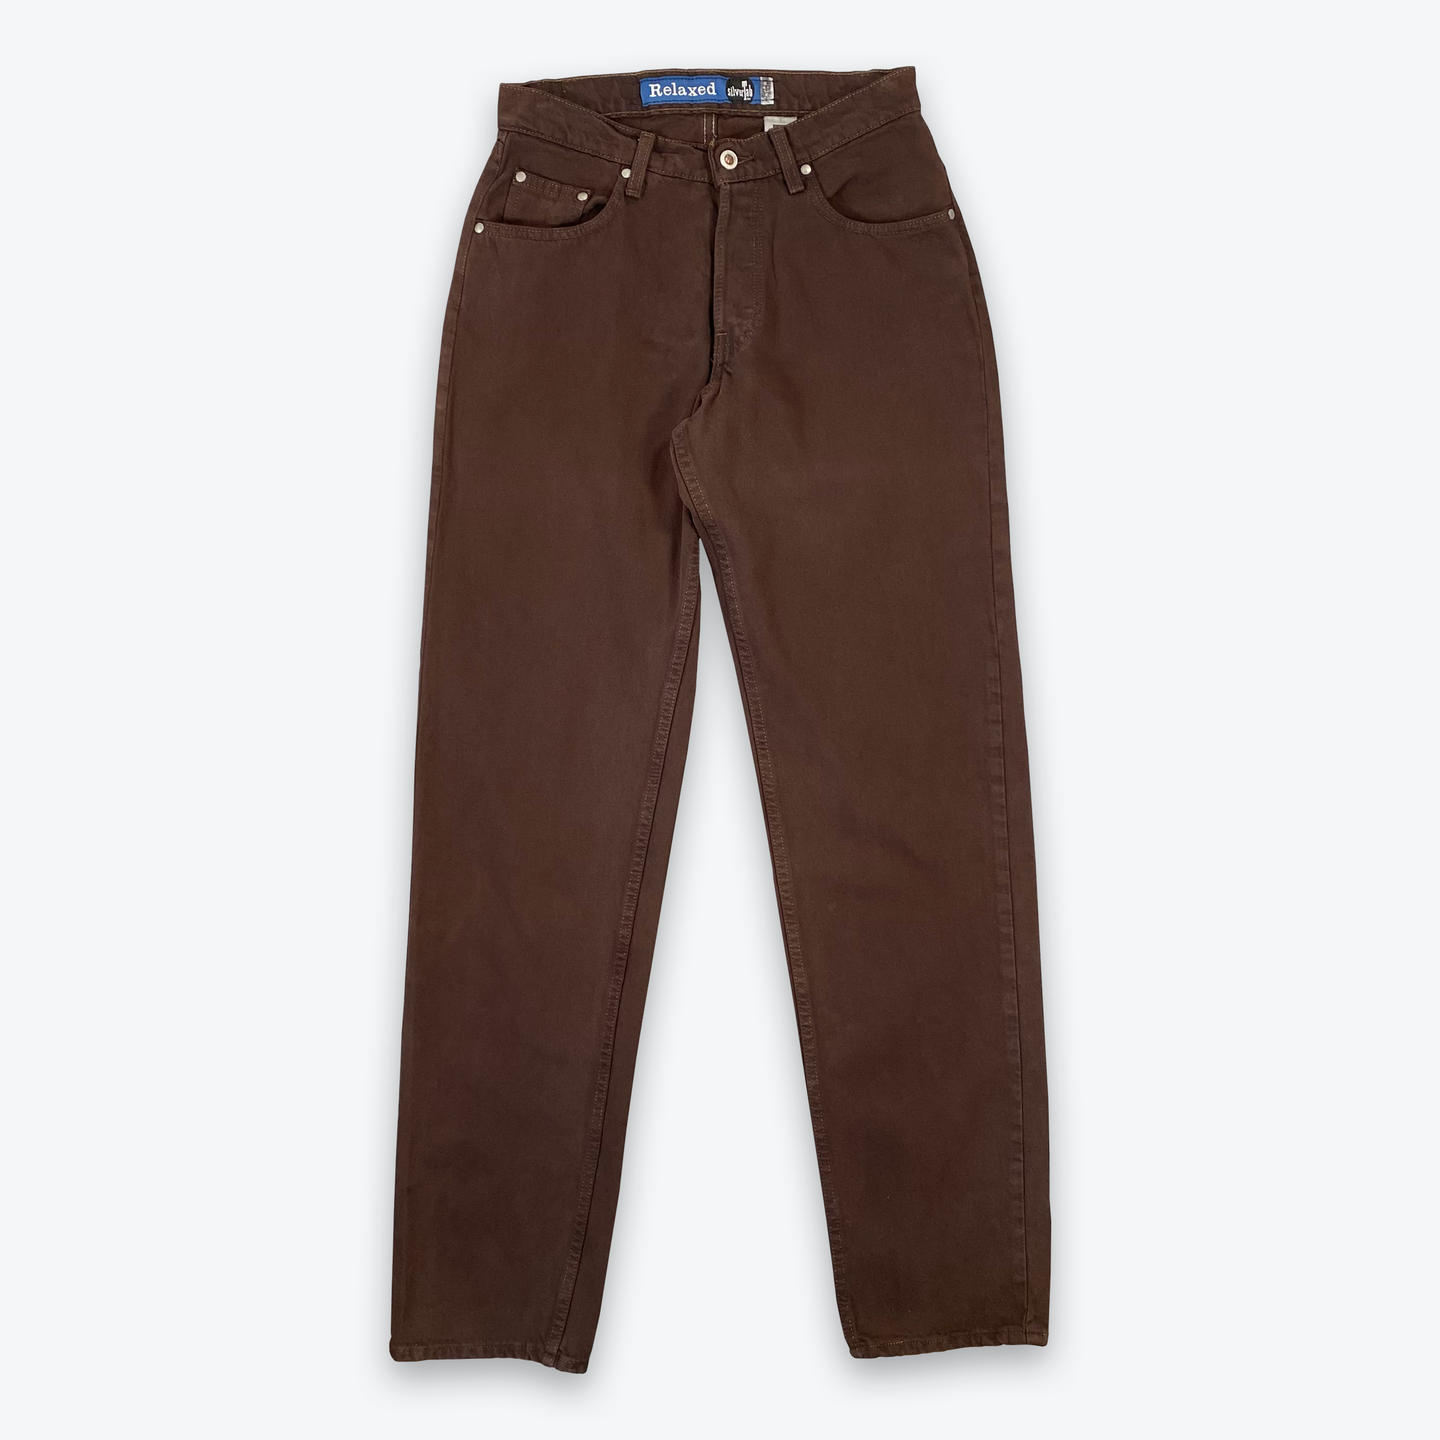 Levi's SilverTab Relaxed (Brown)